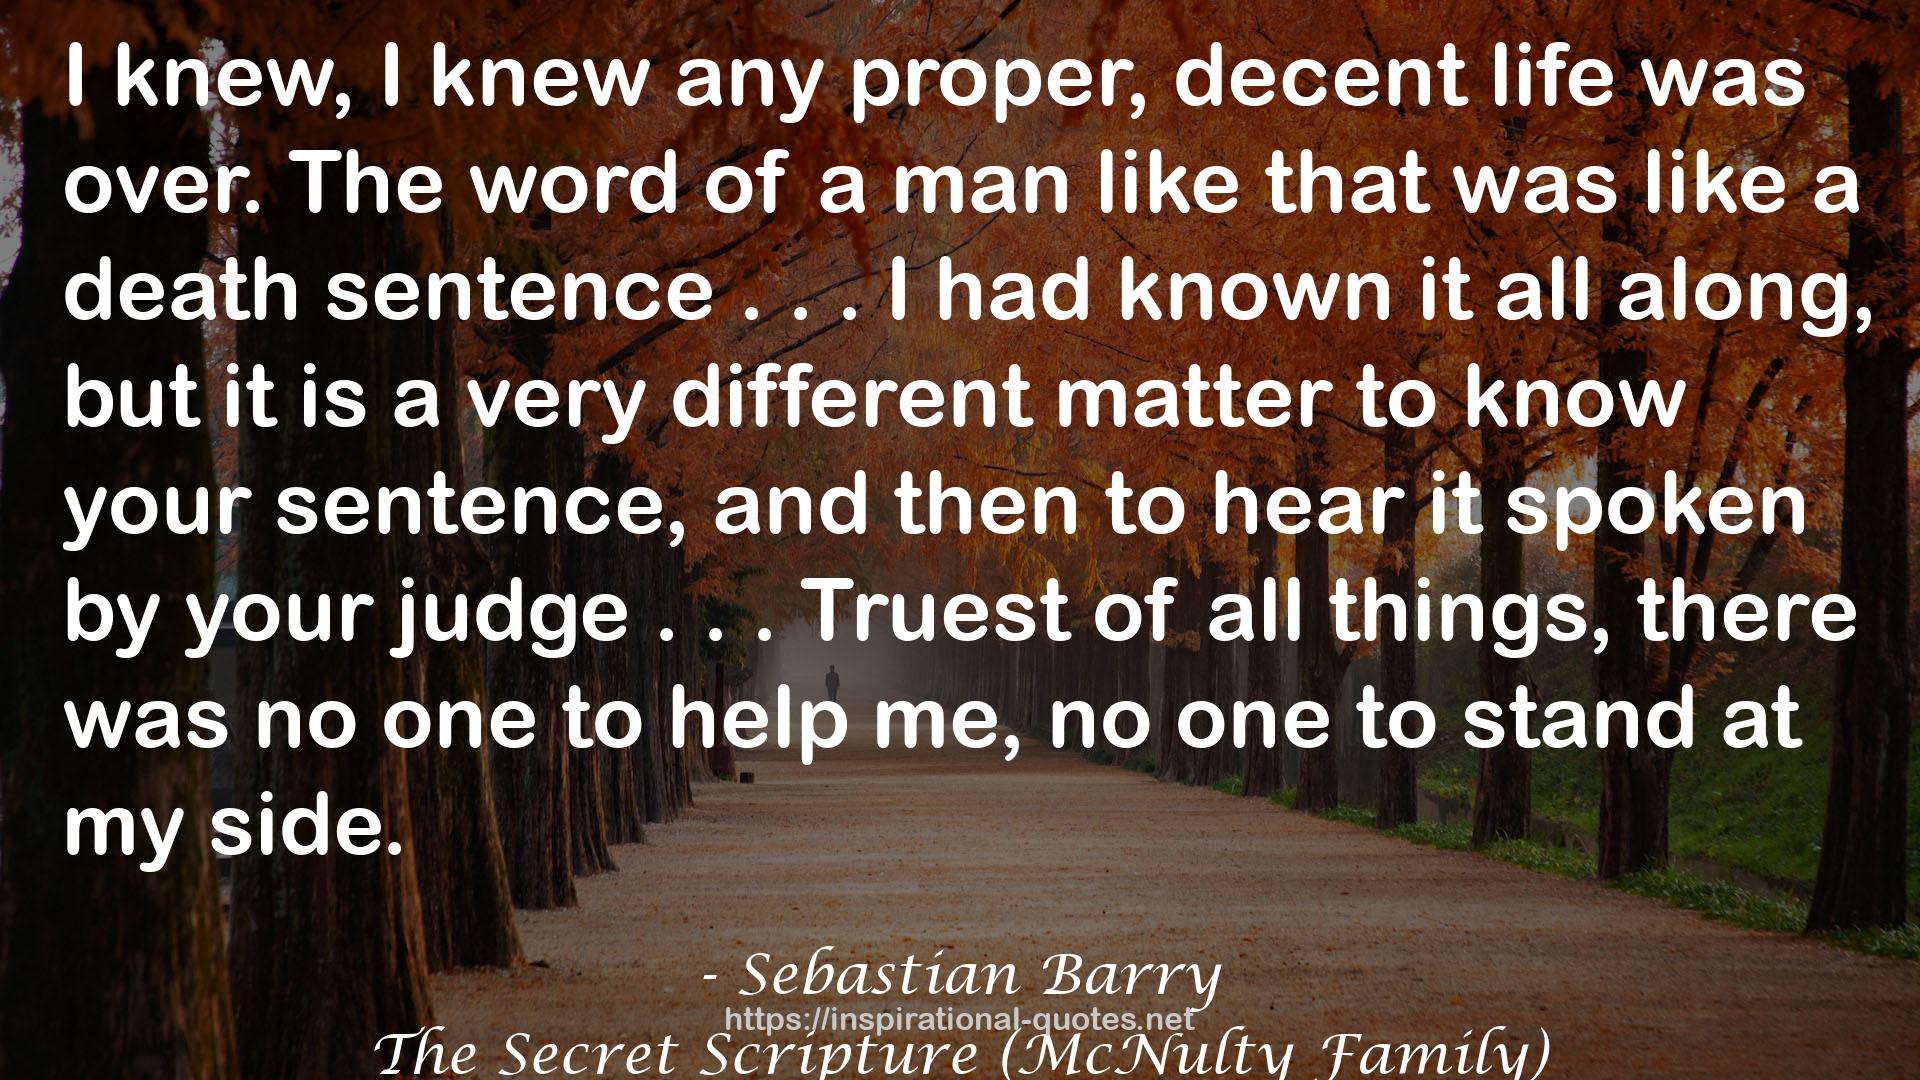 The Secret Scripture (McNulty Family) QUOTES